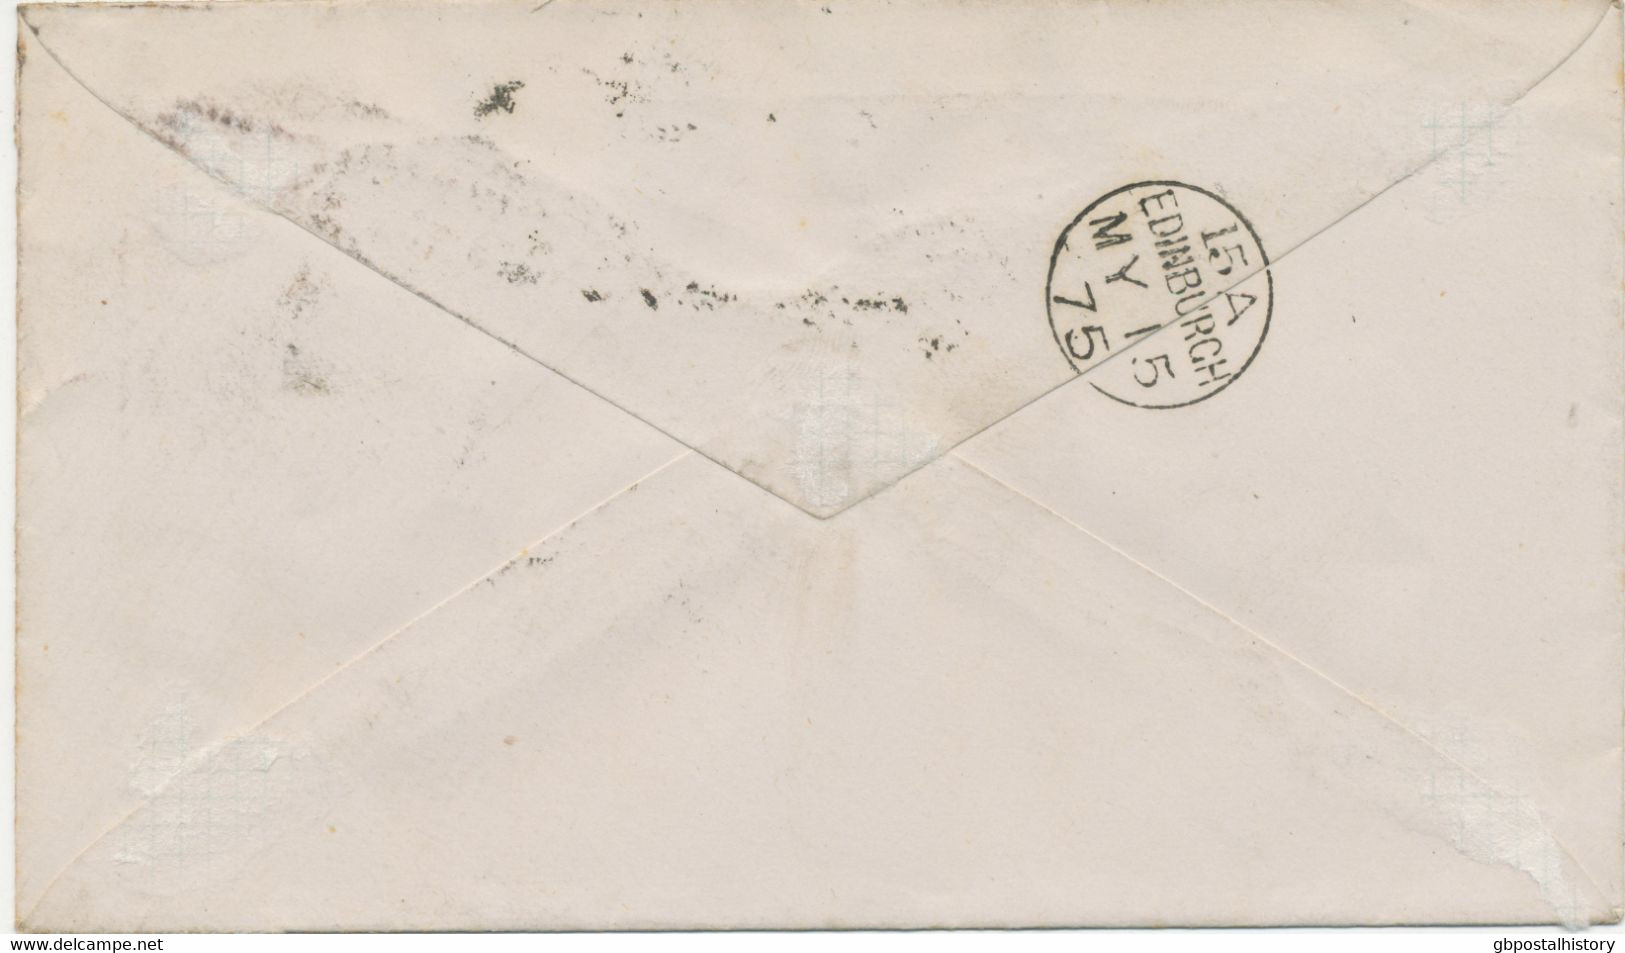 GB „159 / GLASGOW“ Scottish Duplex (4 Bars With Same Length, Time Code „2 &“, Datepart 20mm) On Very Fine Cover - Storia Postale